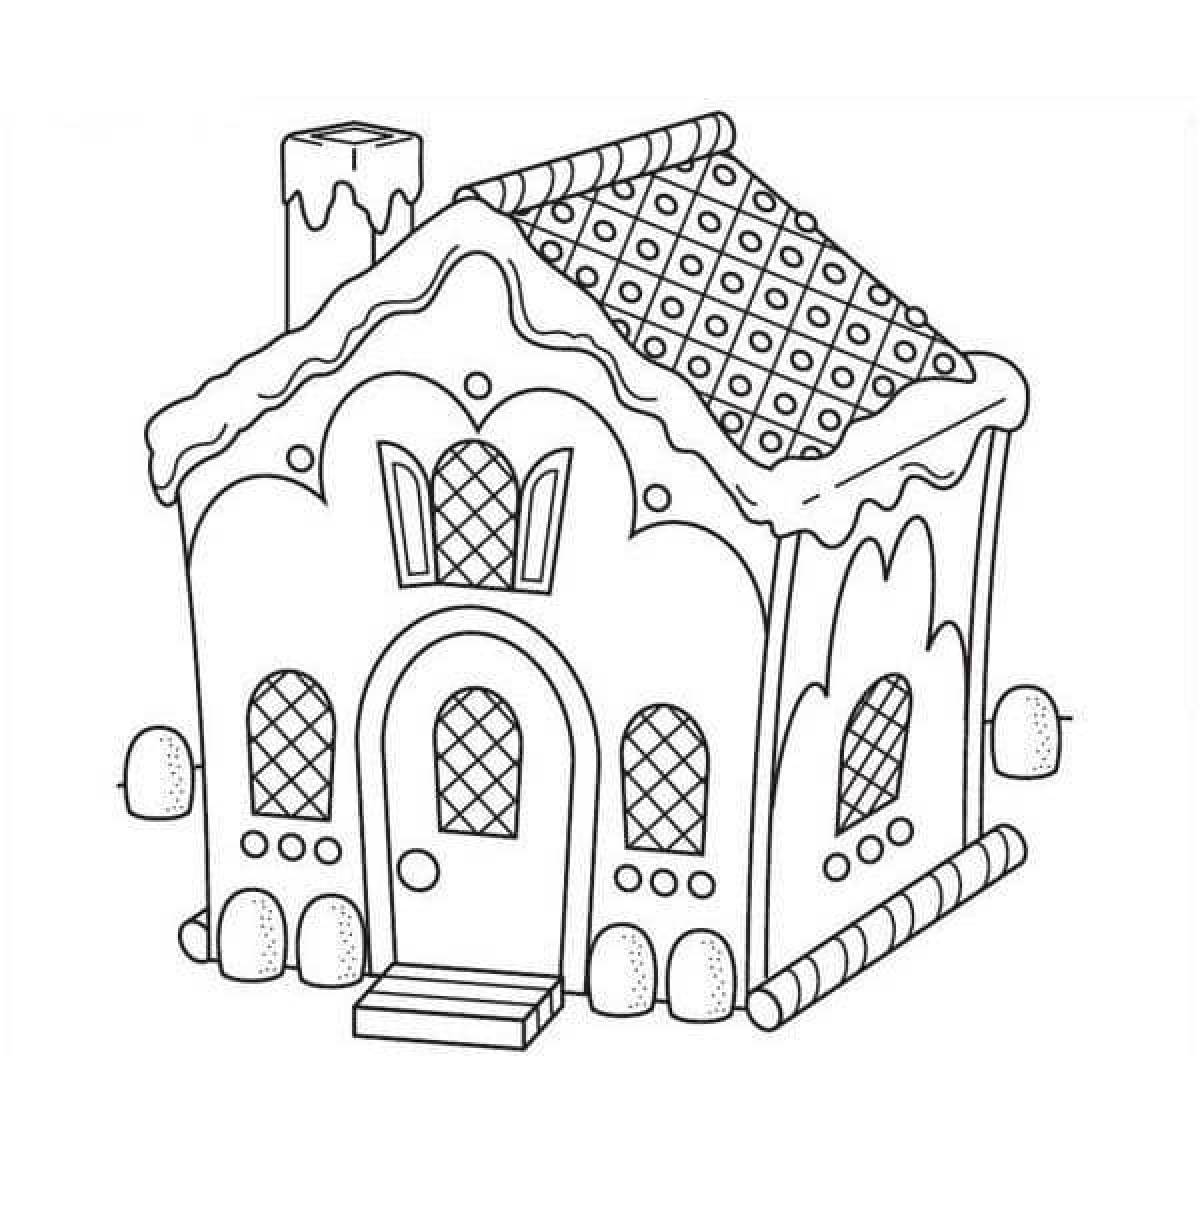 Magic gingerbread house coloring page